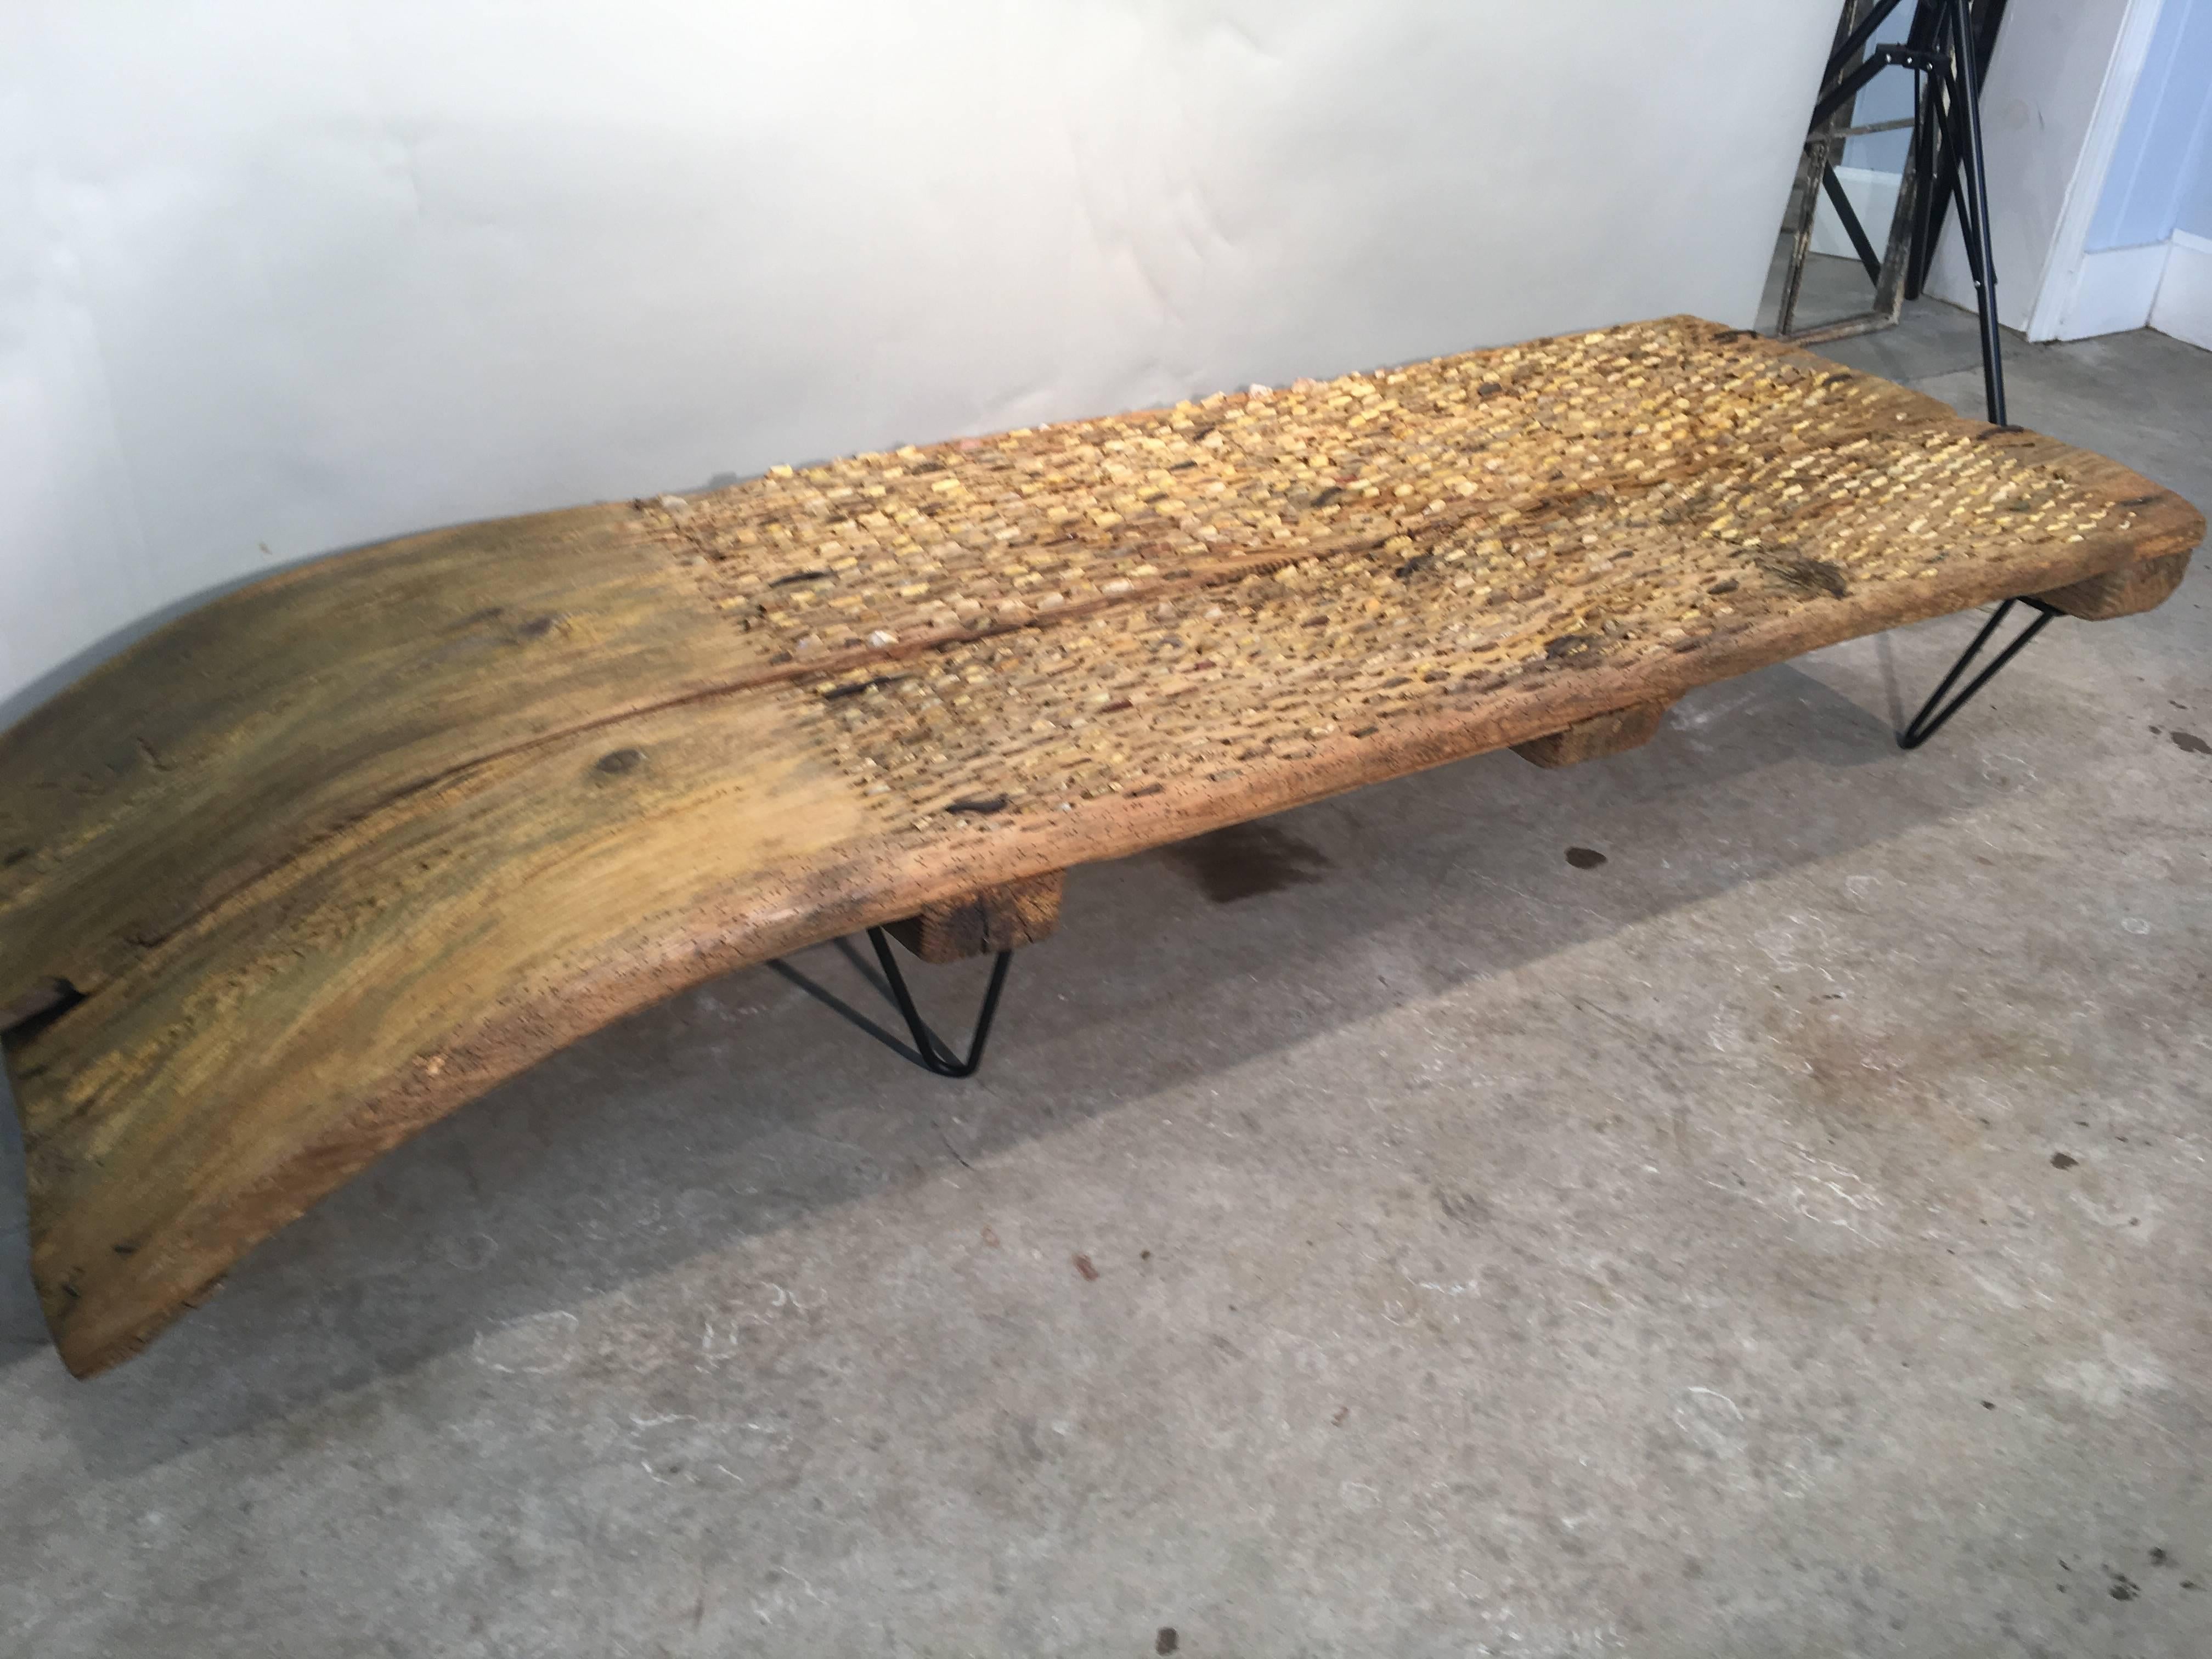 A tribulum is an ancient hand-made threshing board, inlaid with chips of flint or stone, that has been used since Roman times to separate grains from the chaff. 
We were fortunate enough to score two of these coffee tables, this one in a lovely